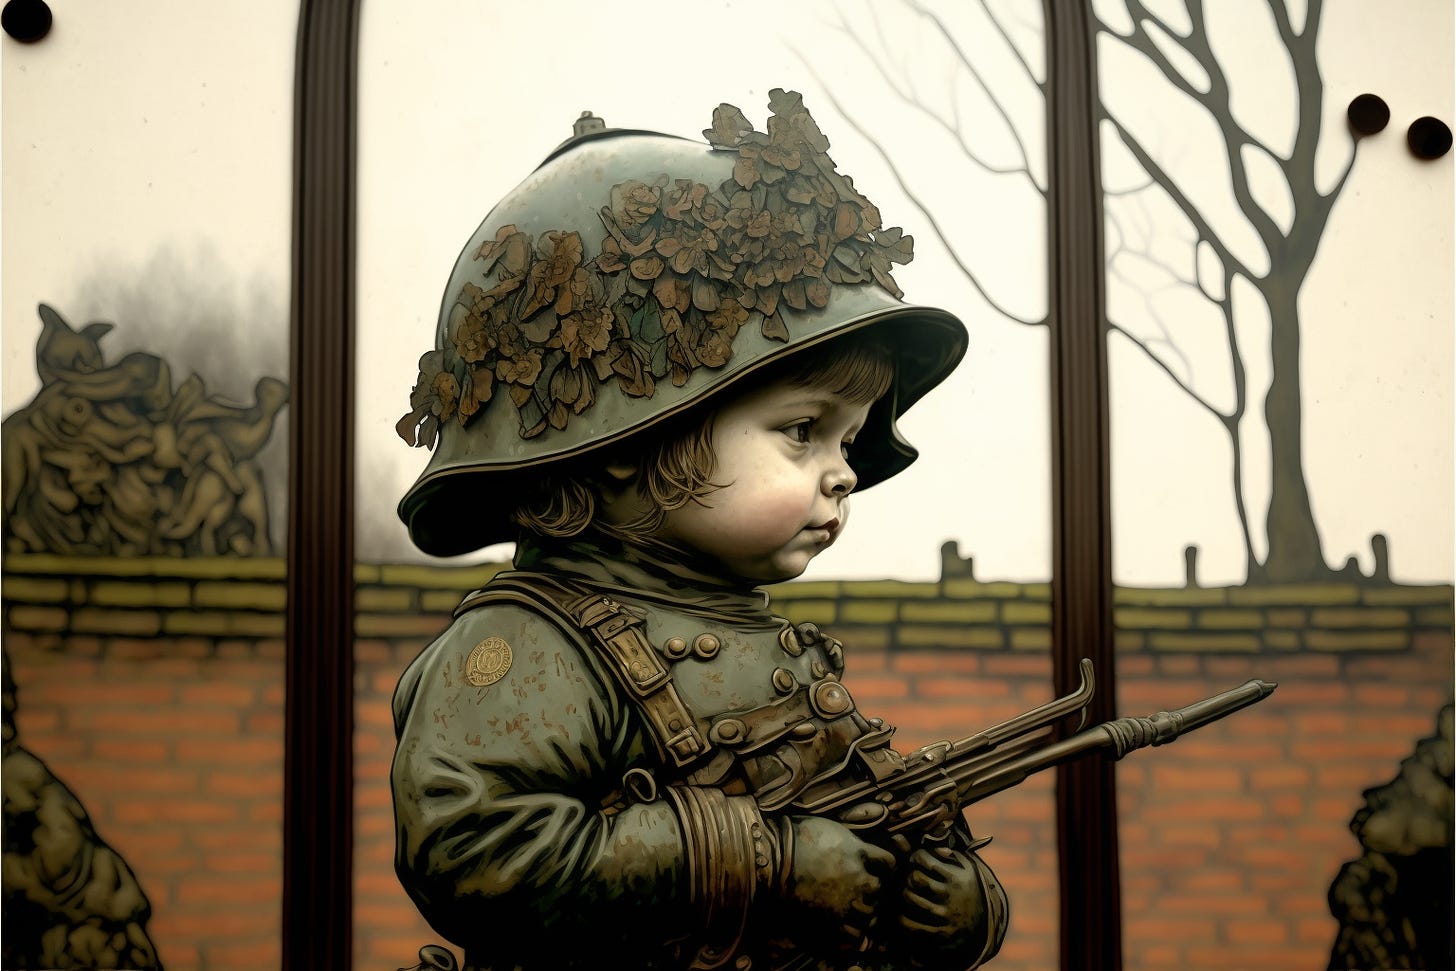 the little insurectionist, child soldier in front of the Warsaw Old Town walls